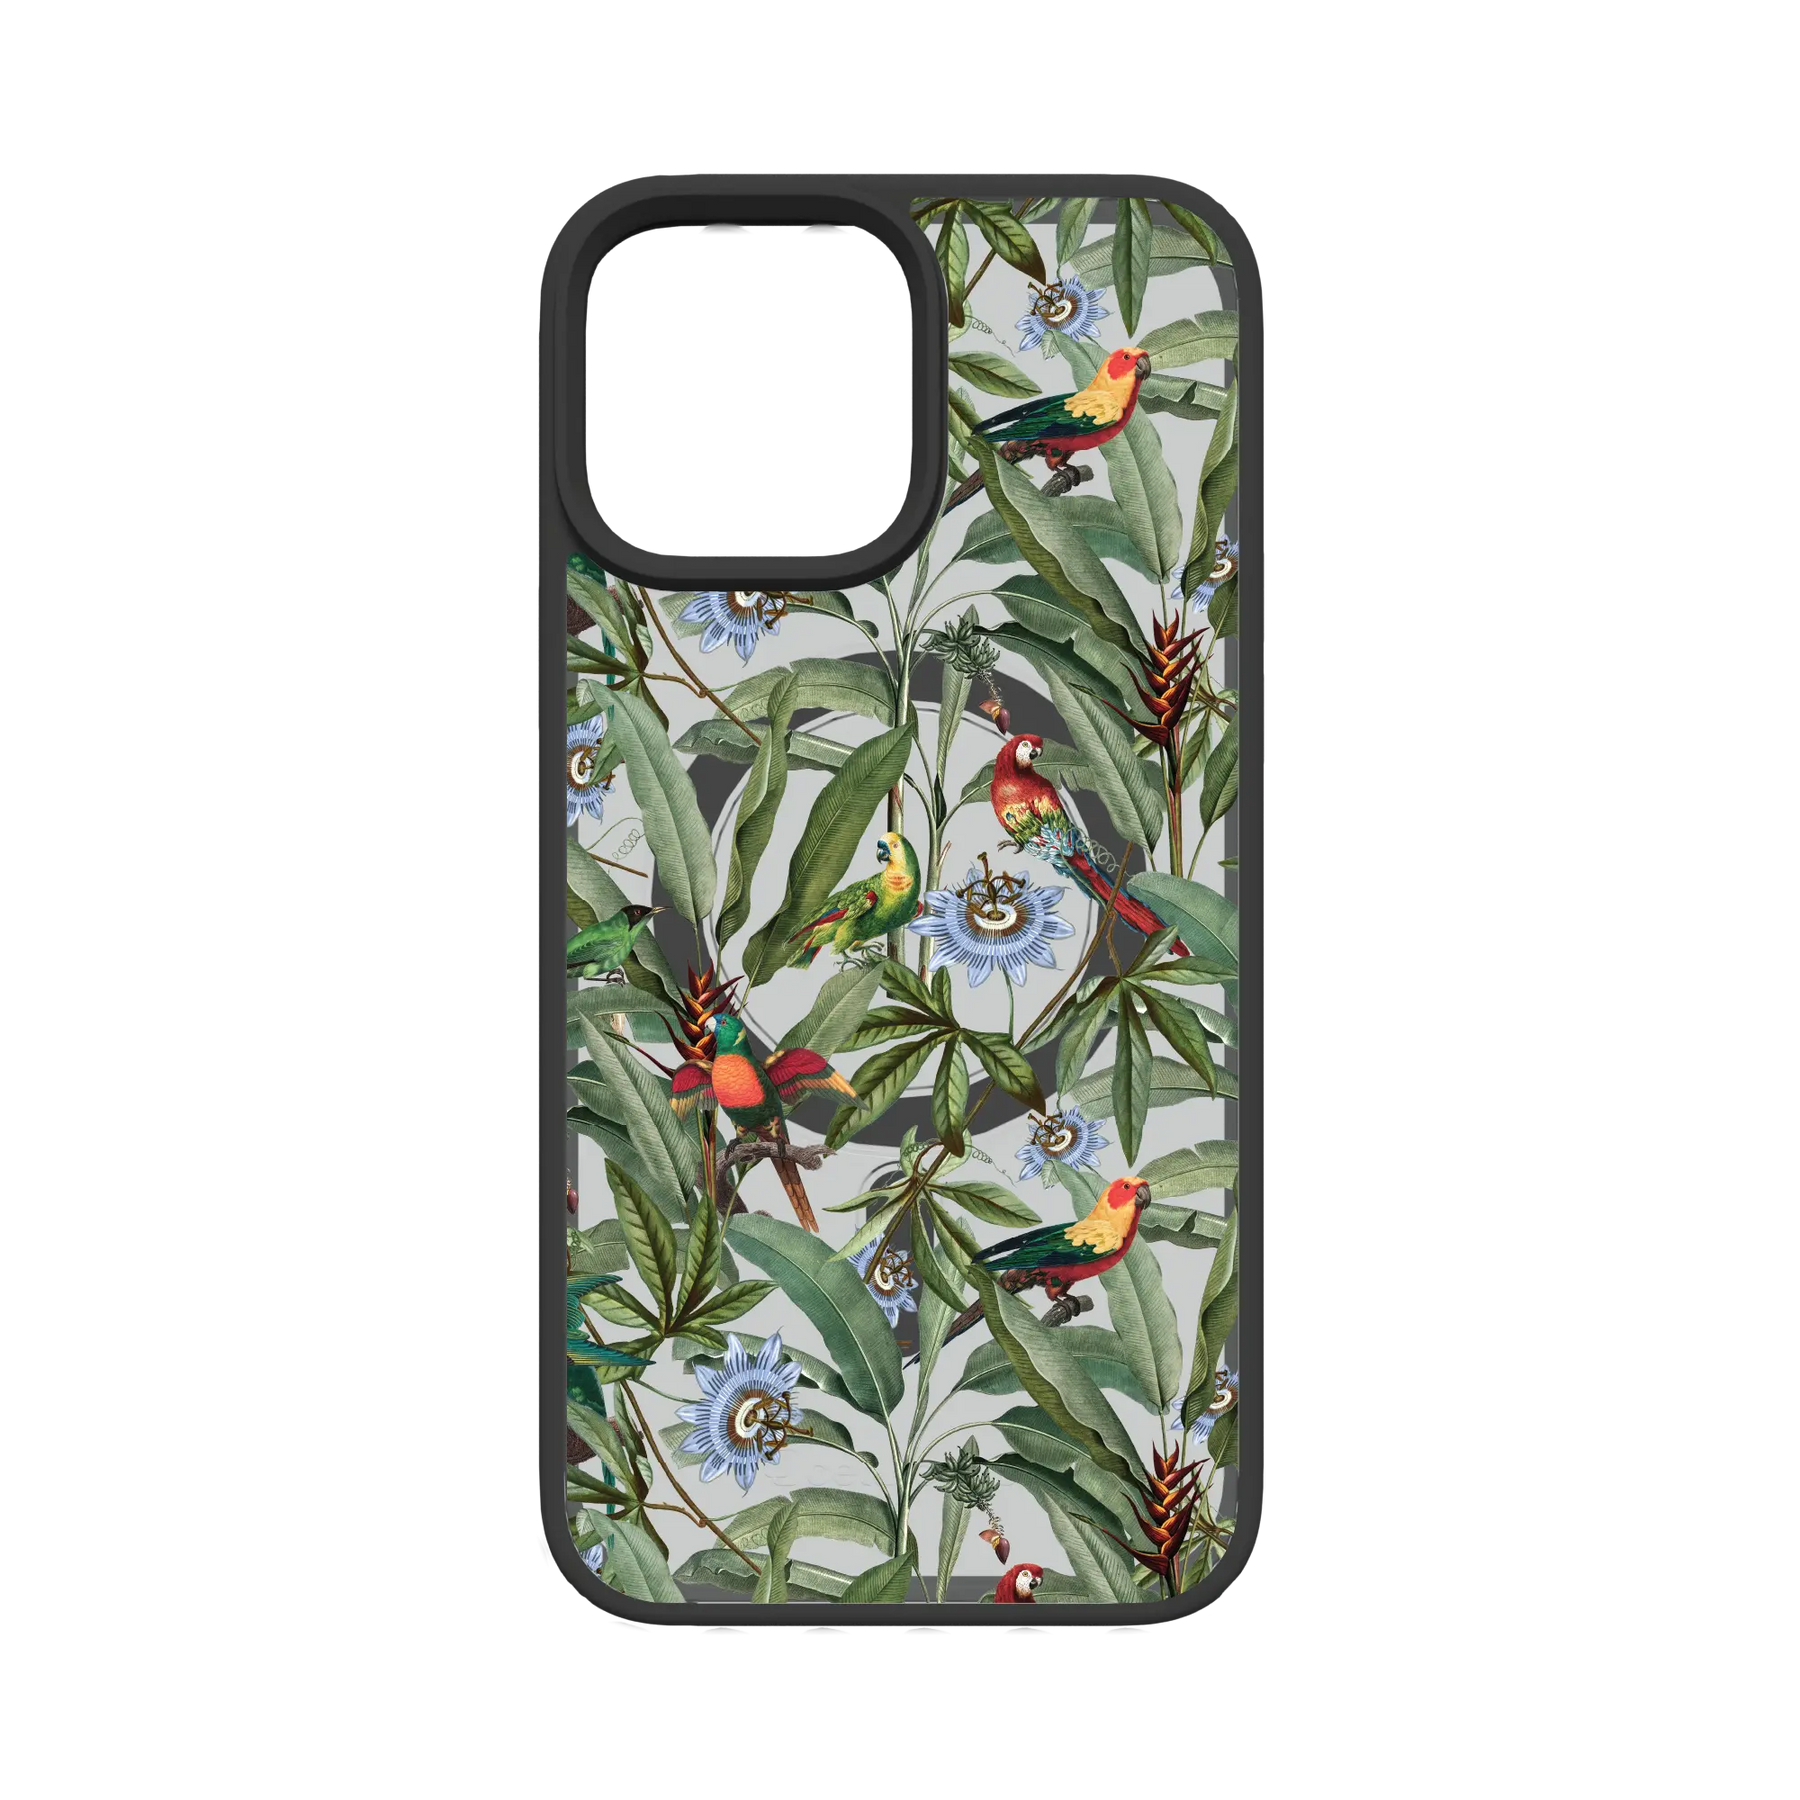 Apple-iPhone-12-Pro-Max-Crystal-Clear Parrot Haven | Protective MagSafe Parrot Floral Case | Birds and Bees Collection for Apple iPhone 12 Series cellhelmet cellhelmet